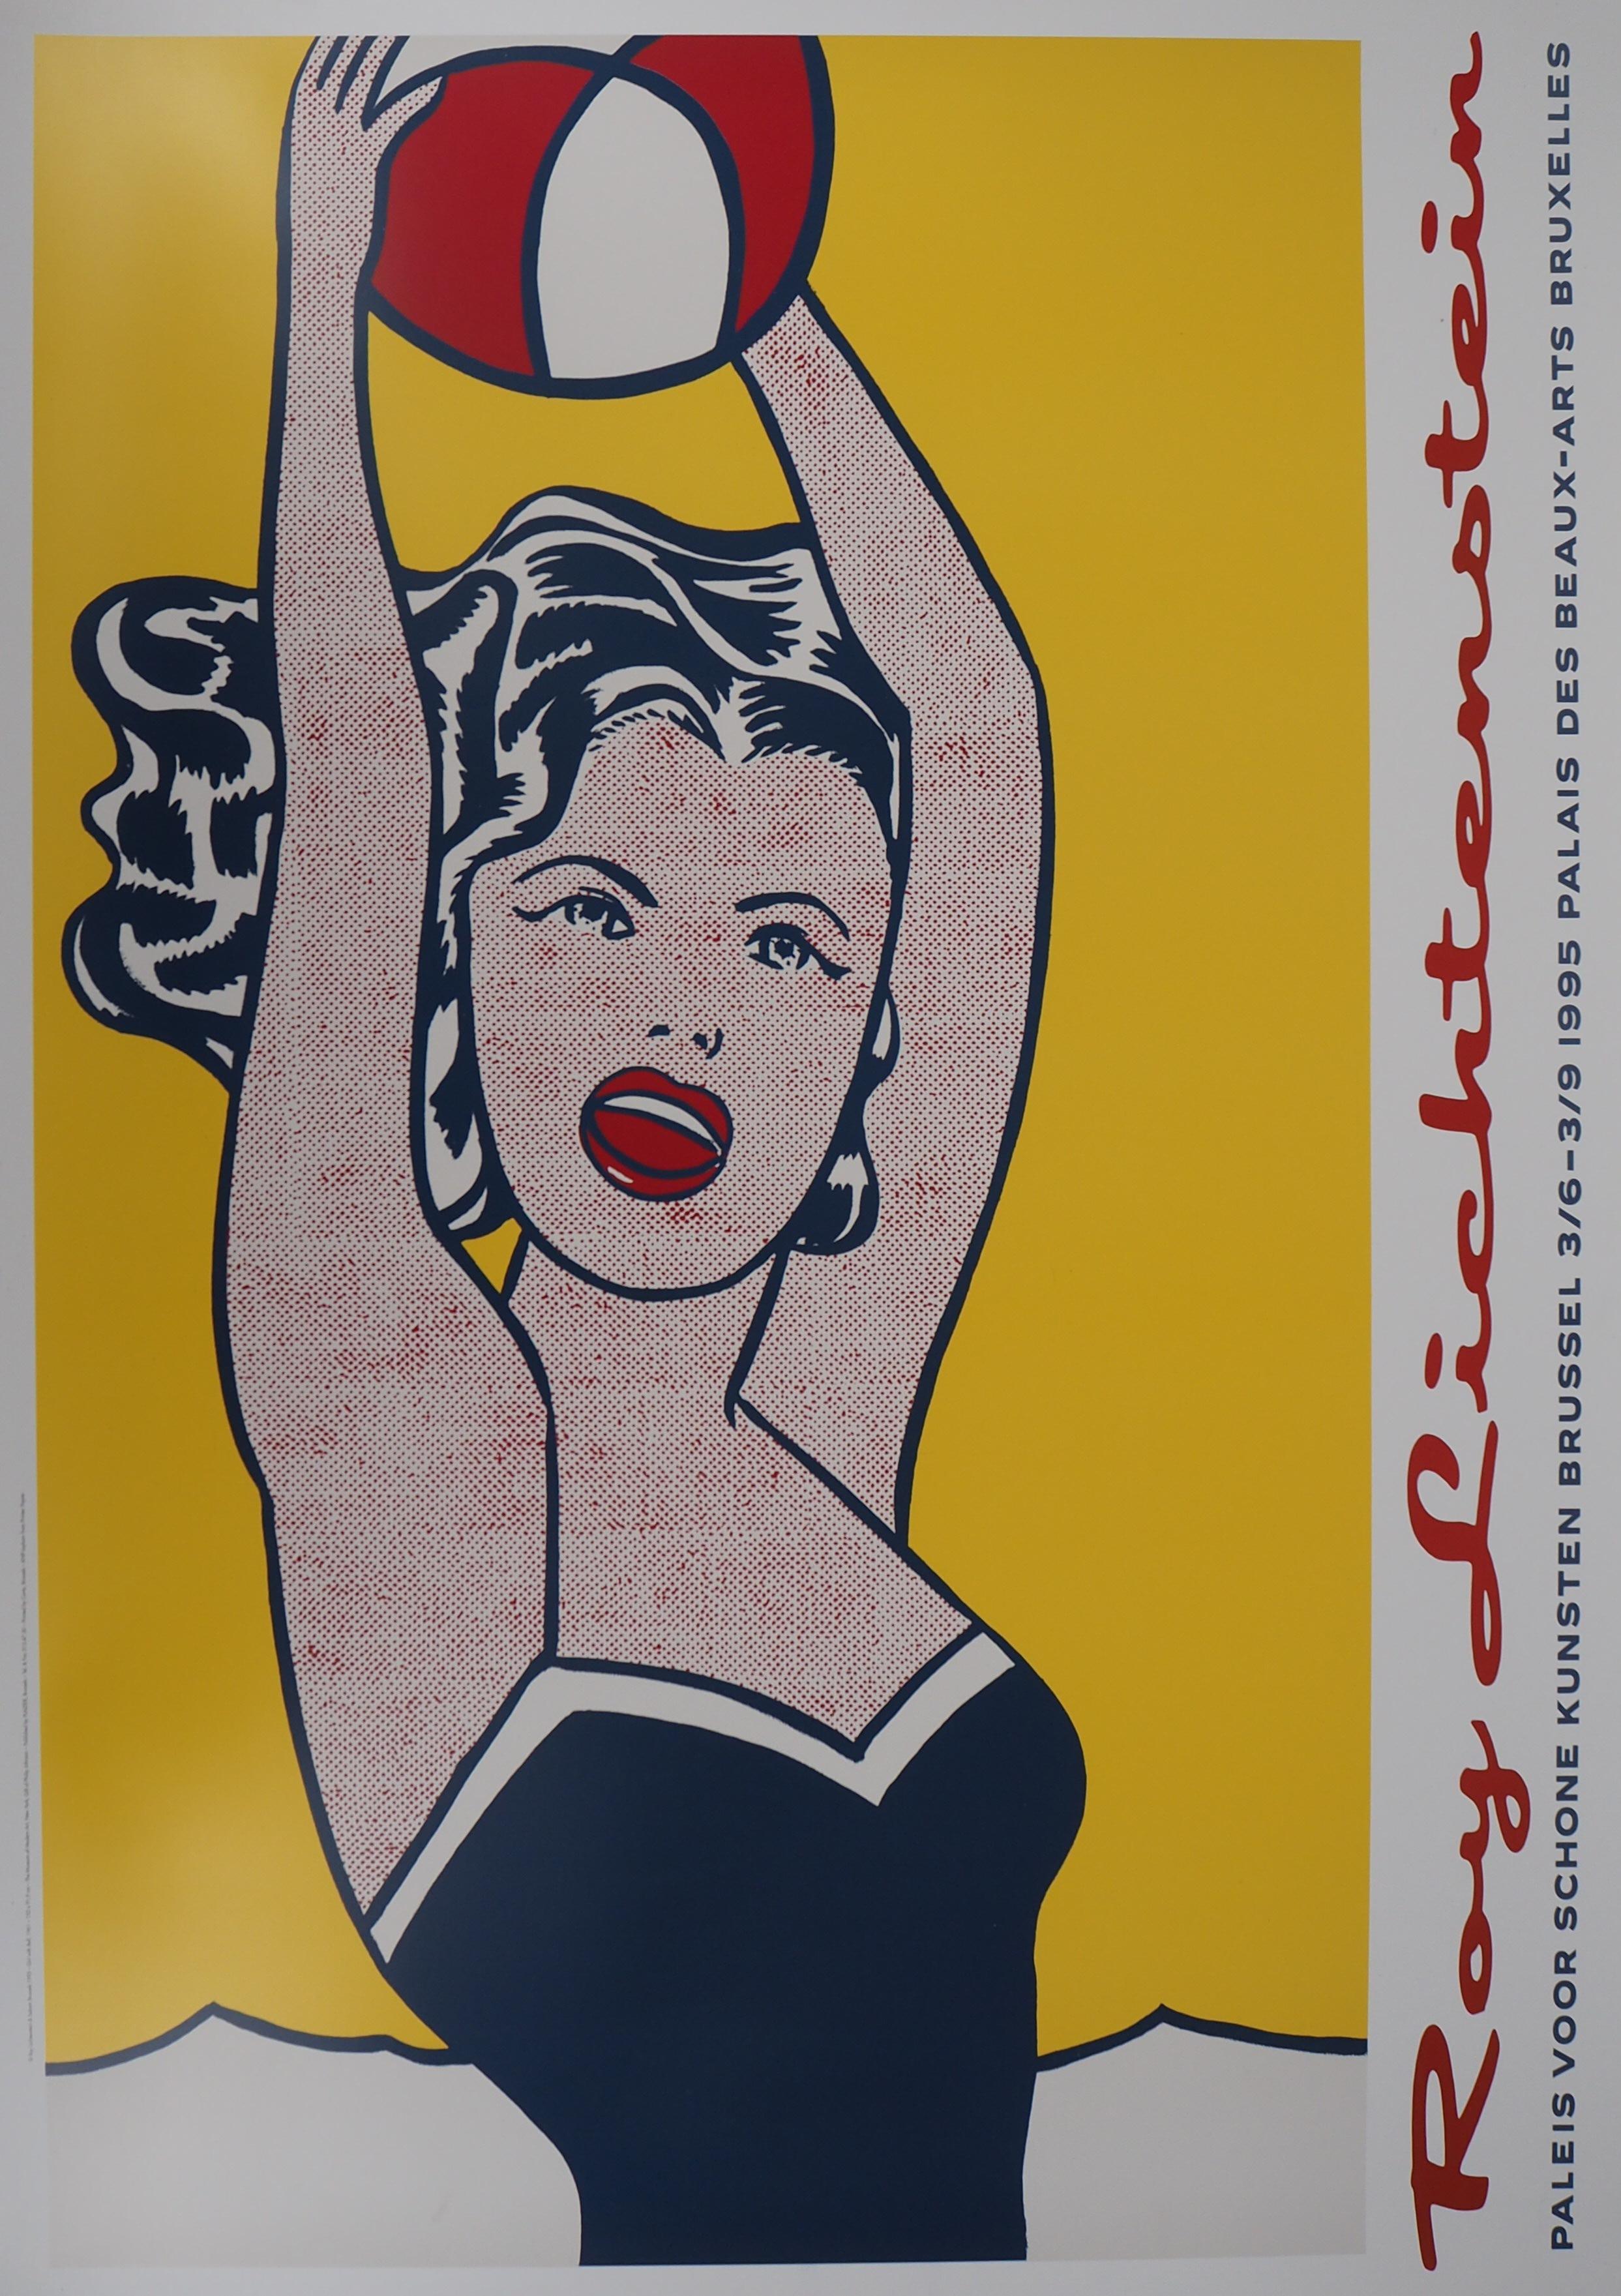 Woman with Red Ball - Original vintage poster, Bruxelles 1995 - Print by (after) Roy Lichtenstein